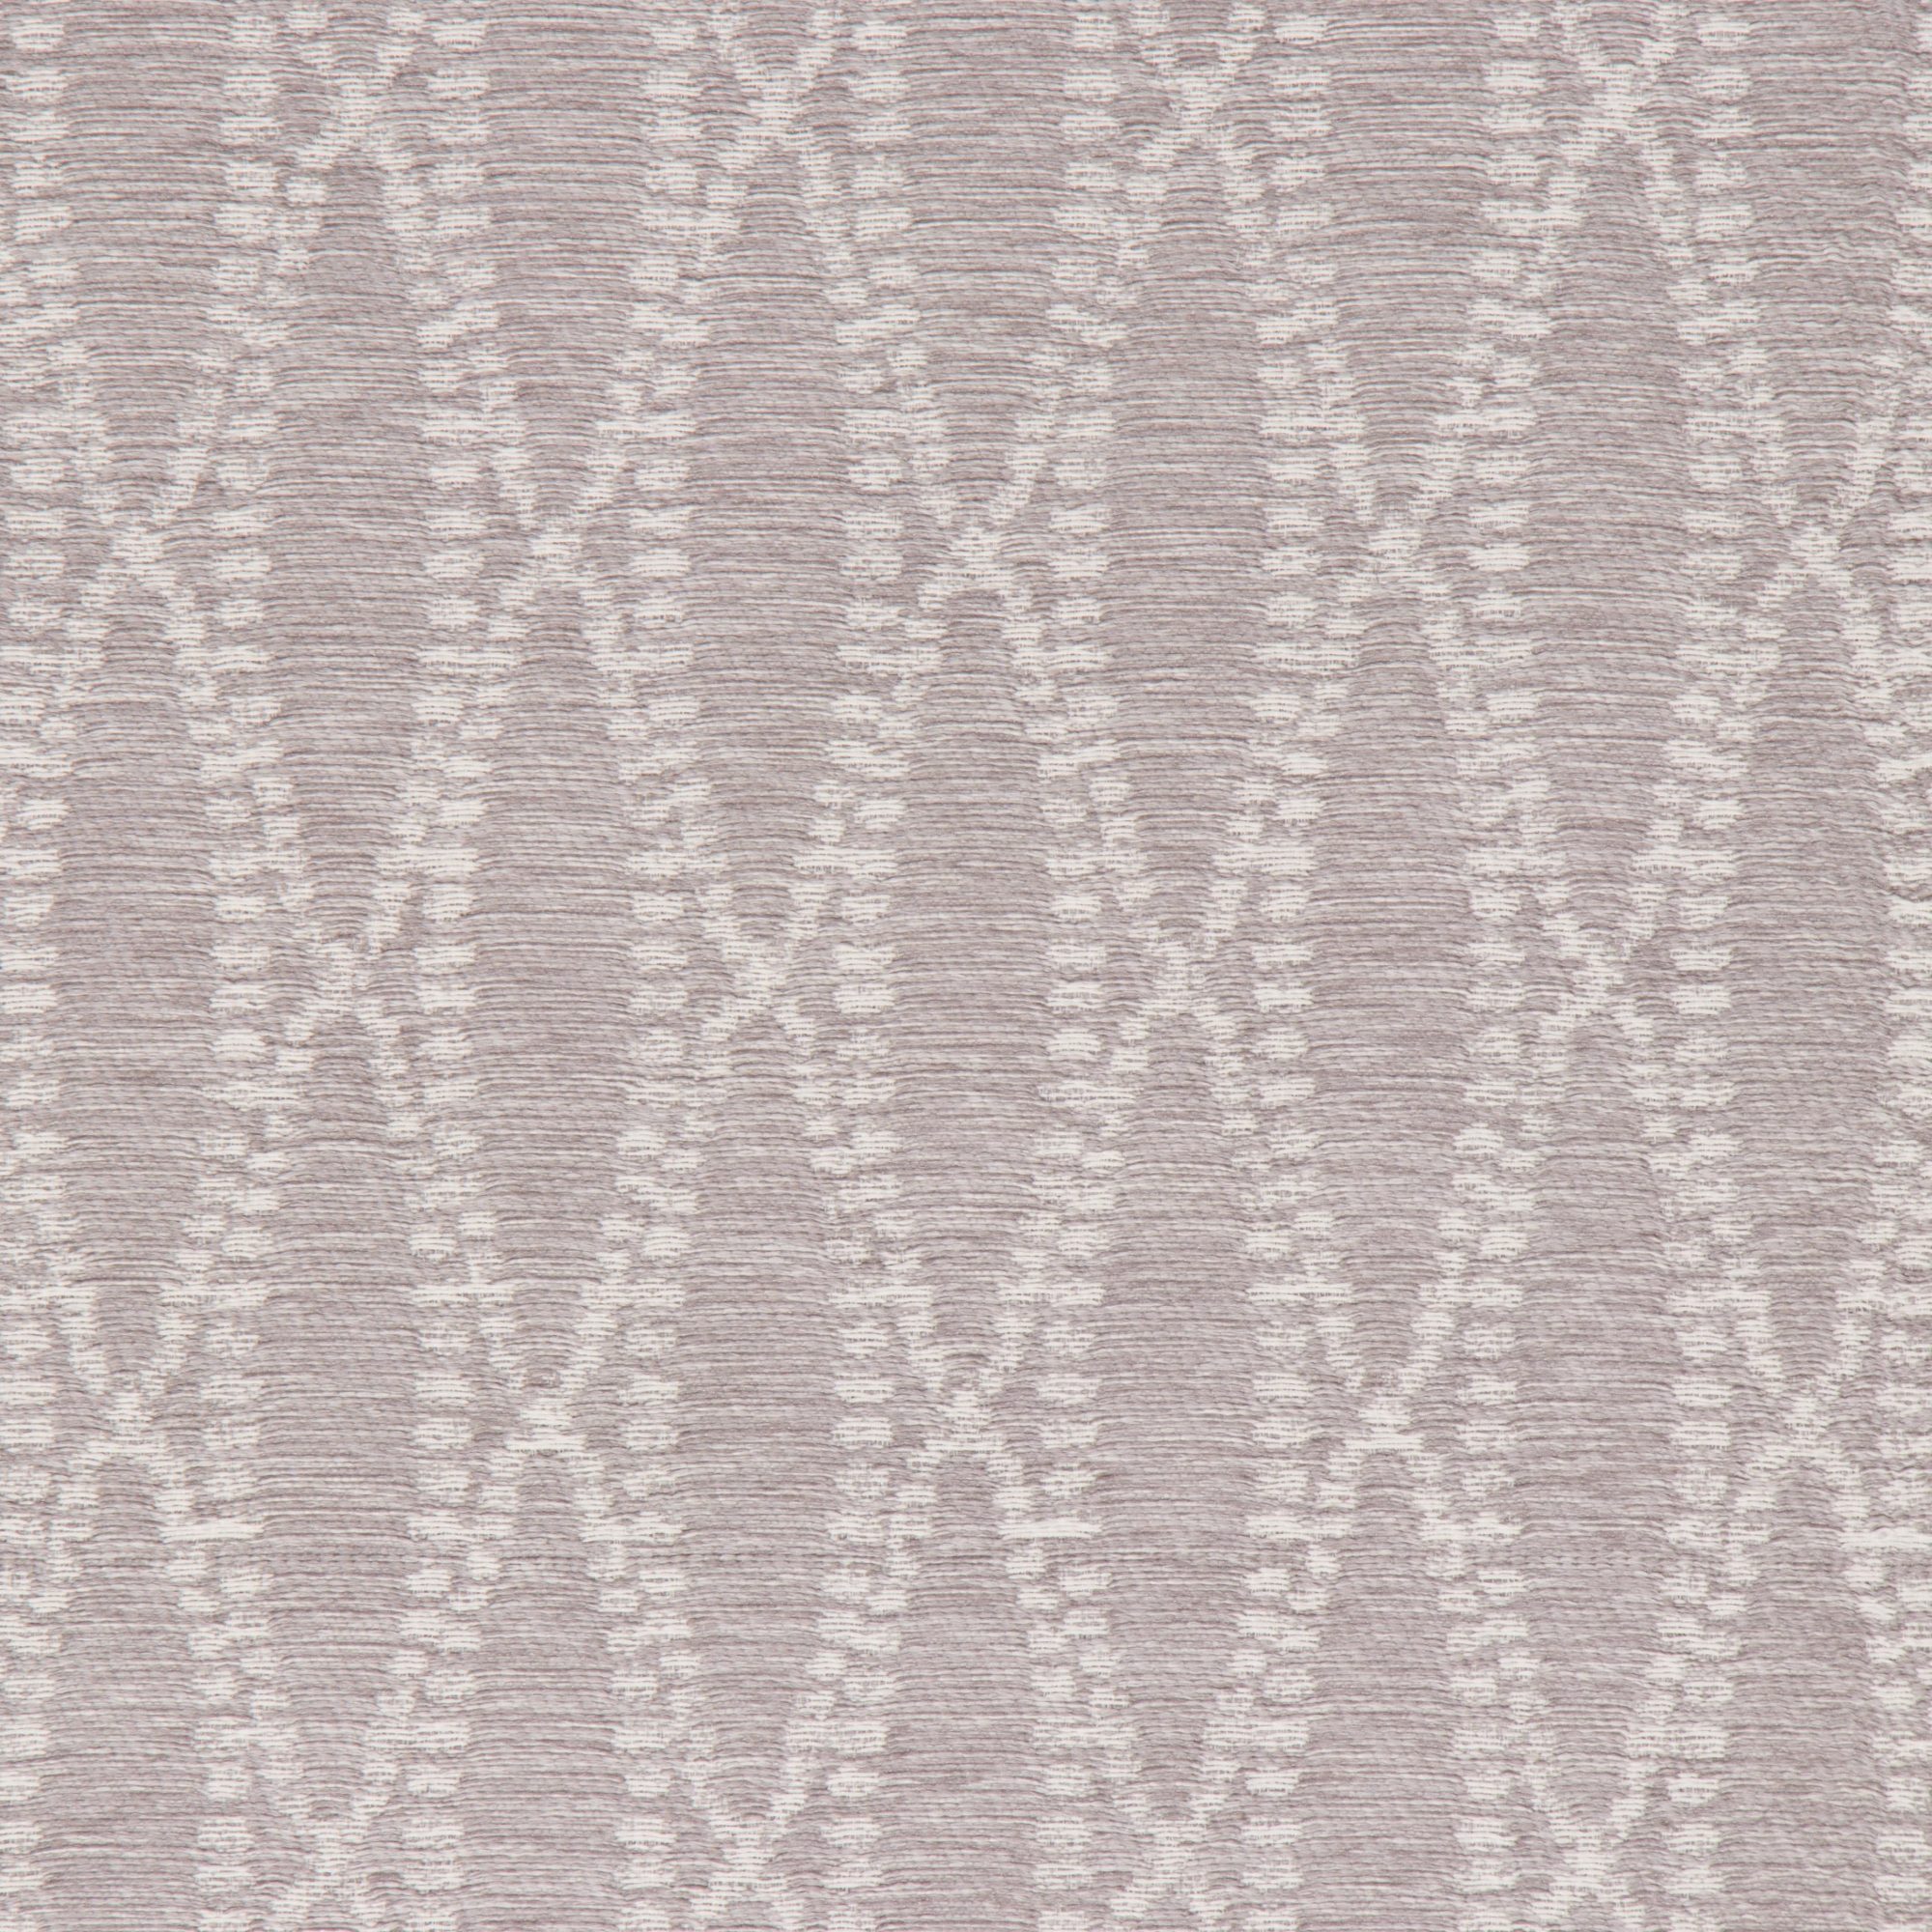 Bella Dura and Bella Dura Home cut yardage in the Camber pattern and Shale color.